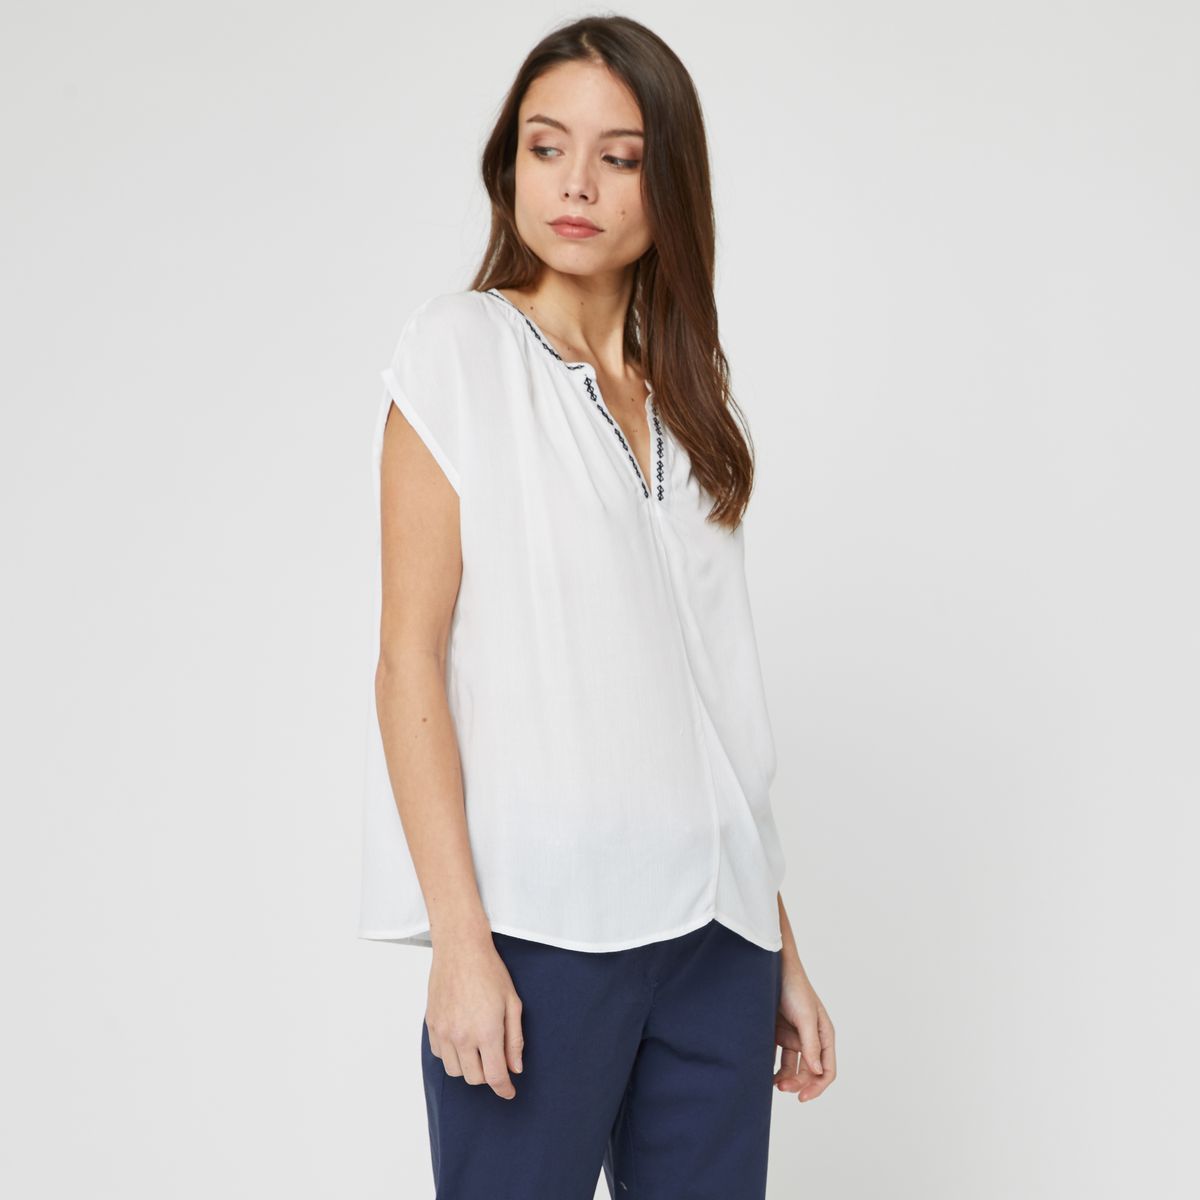 INEXTENSO Chemise blanche femme